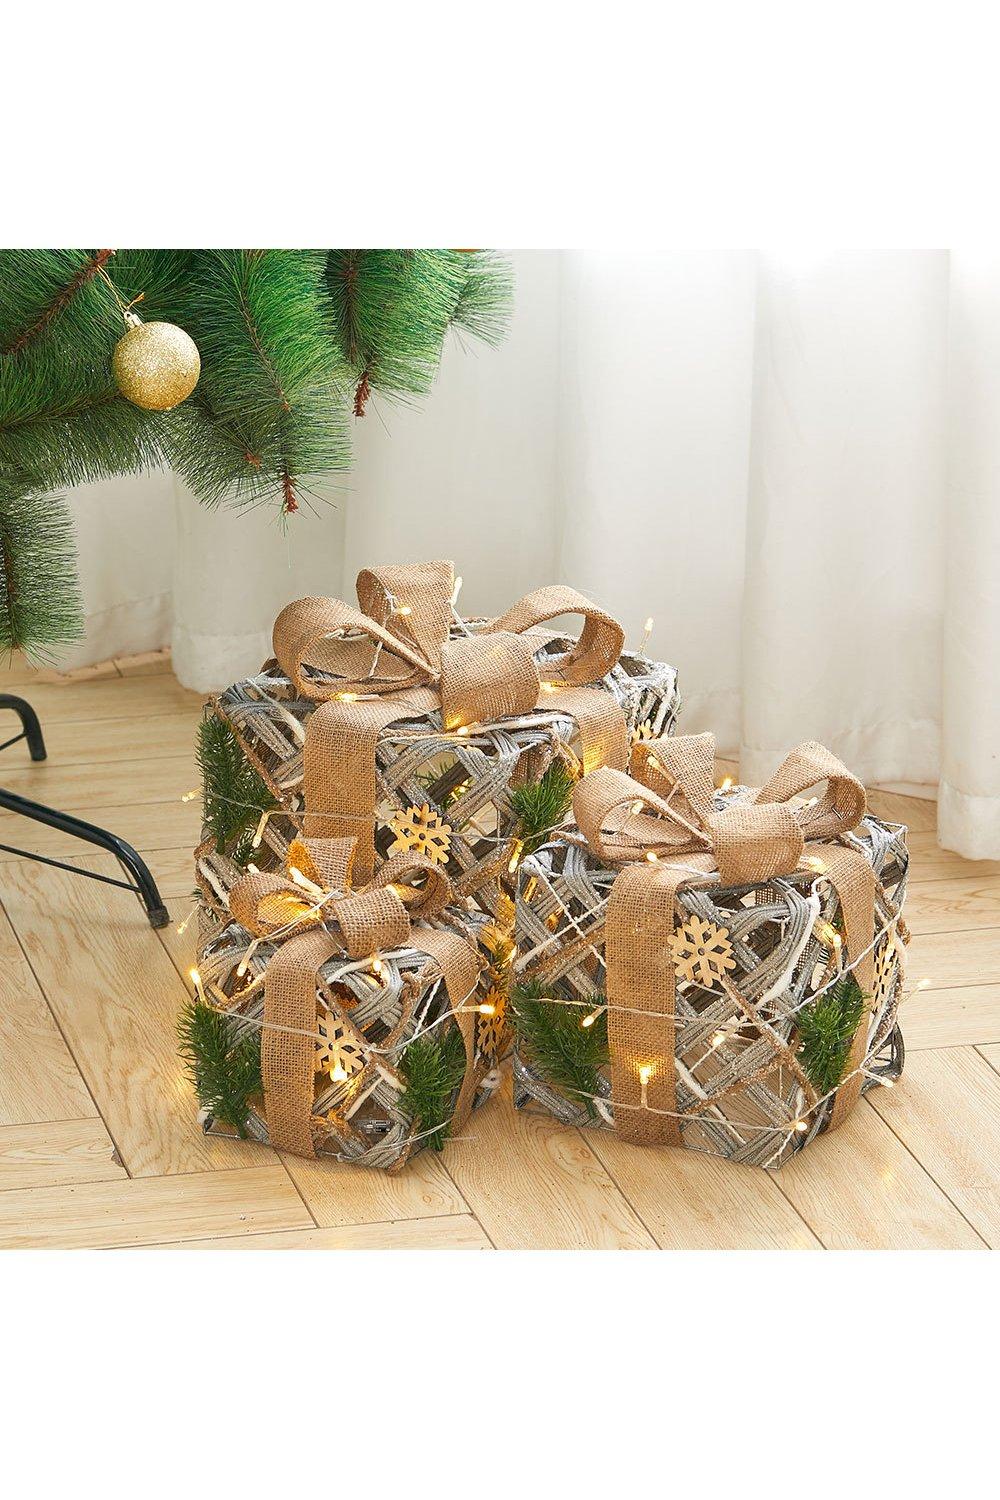 3 Pcs Christmas Decorative Gift Cube Box with Pine Bowknot Home Decor